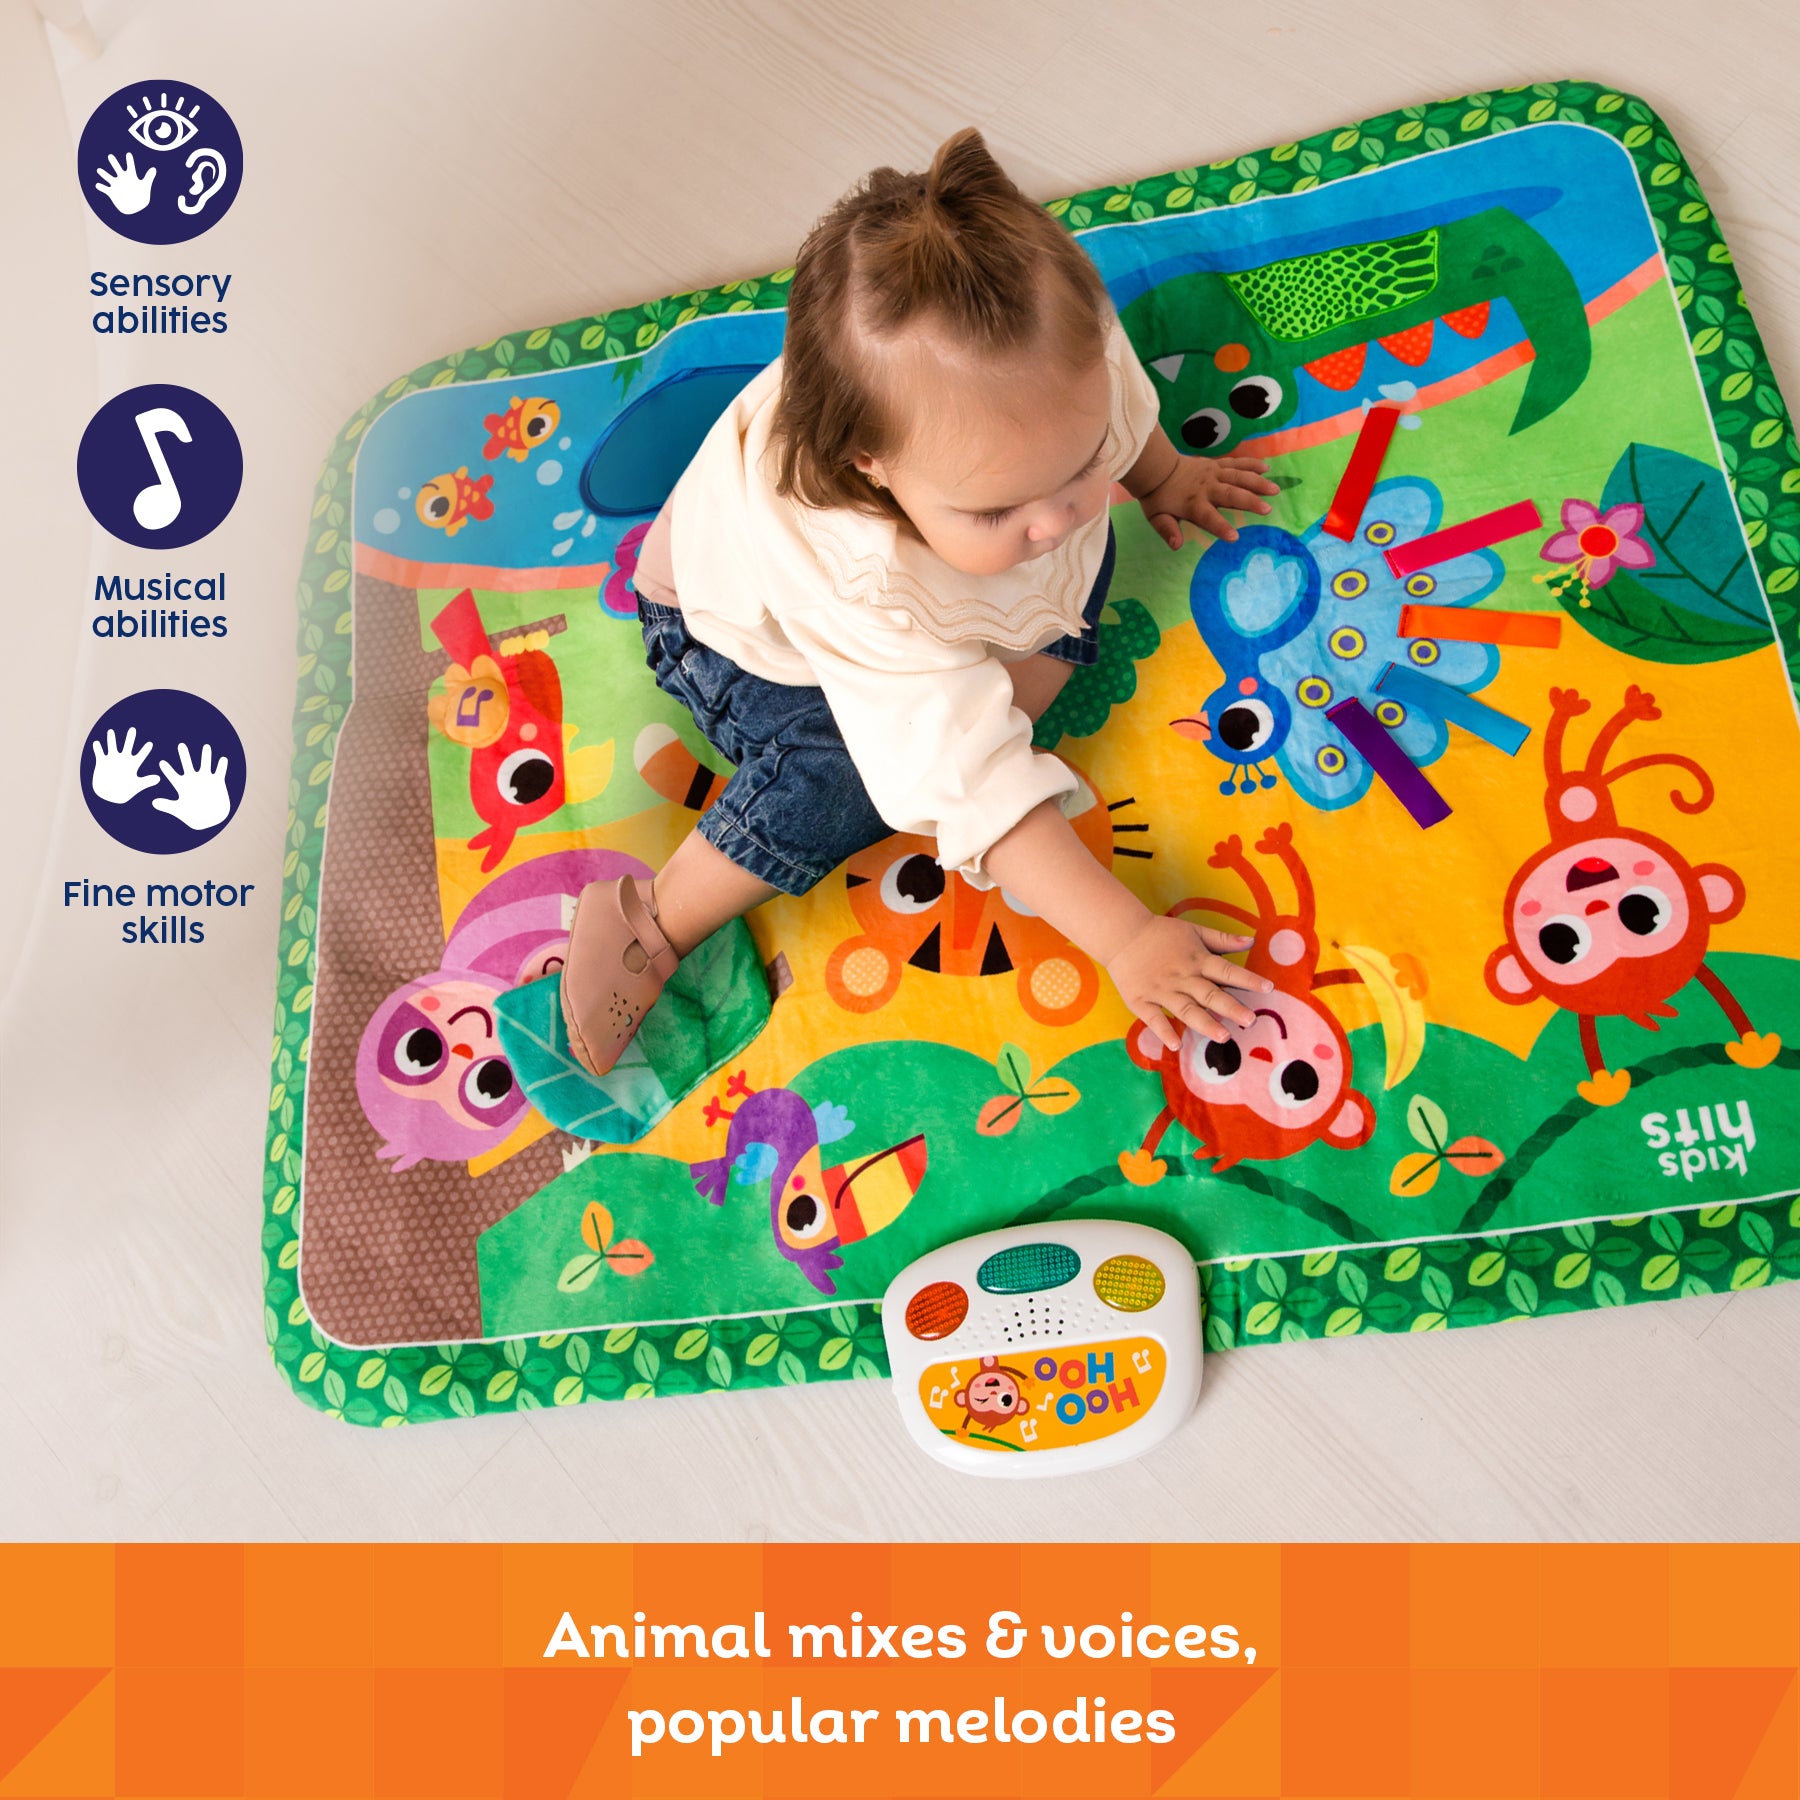 Kids Hits Educational Baby Touch and  Play Mat Toy Jungle Pals